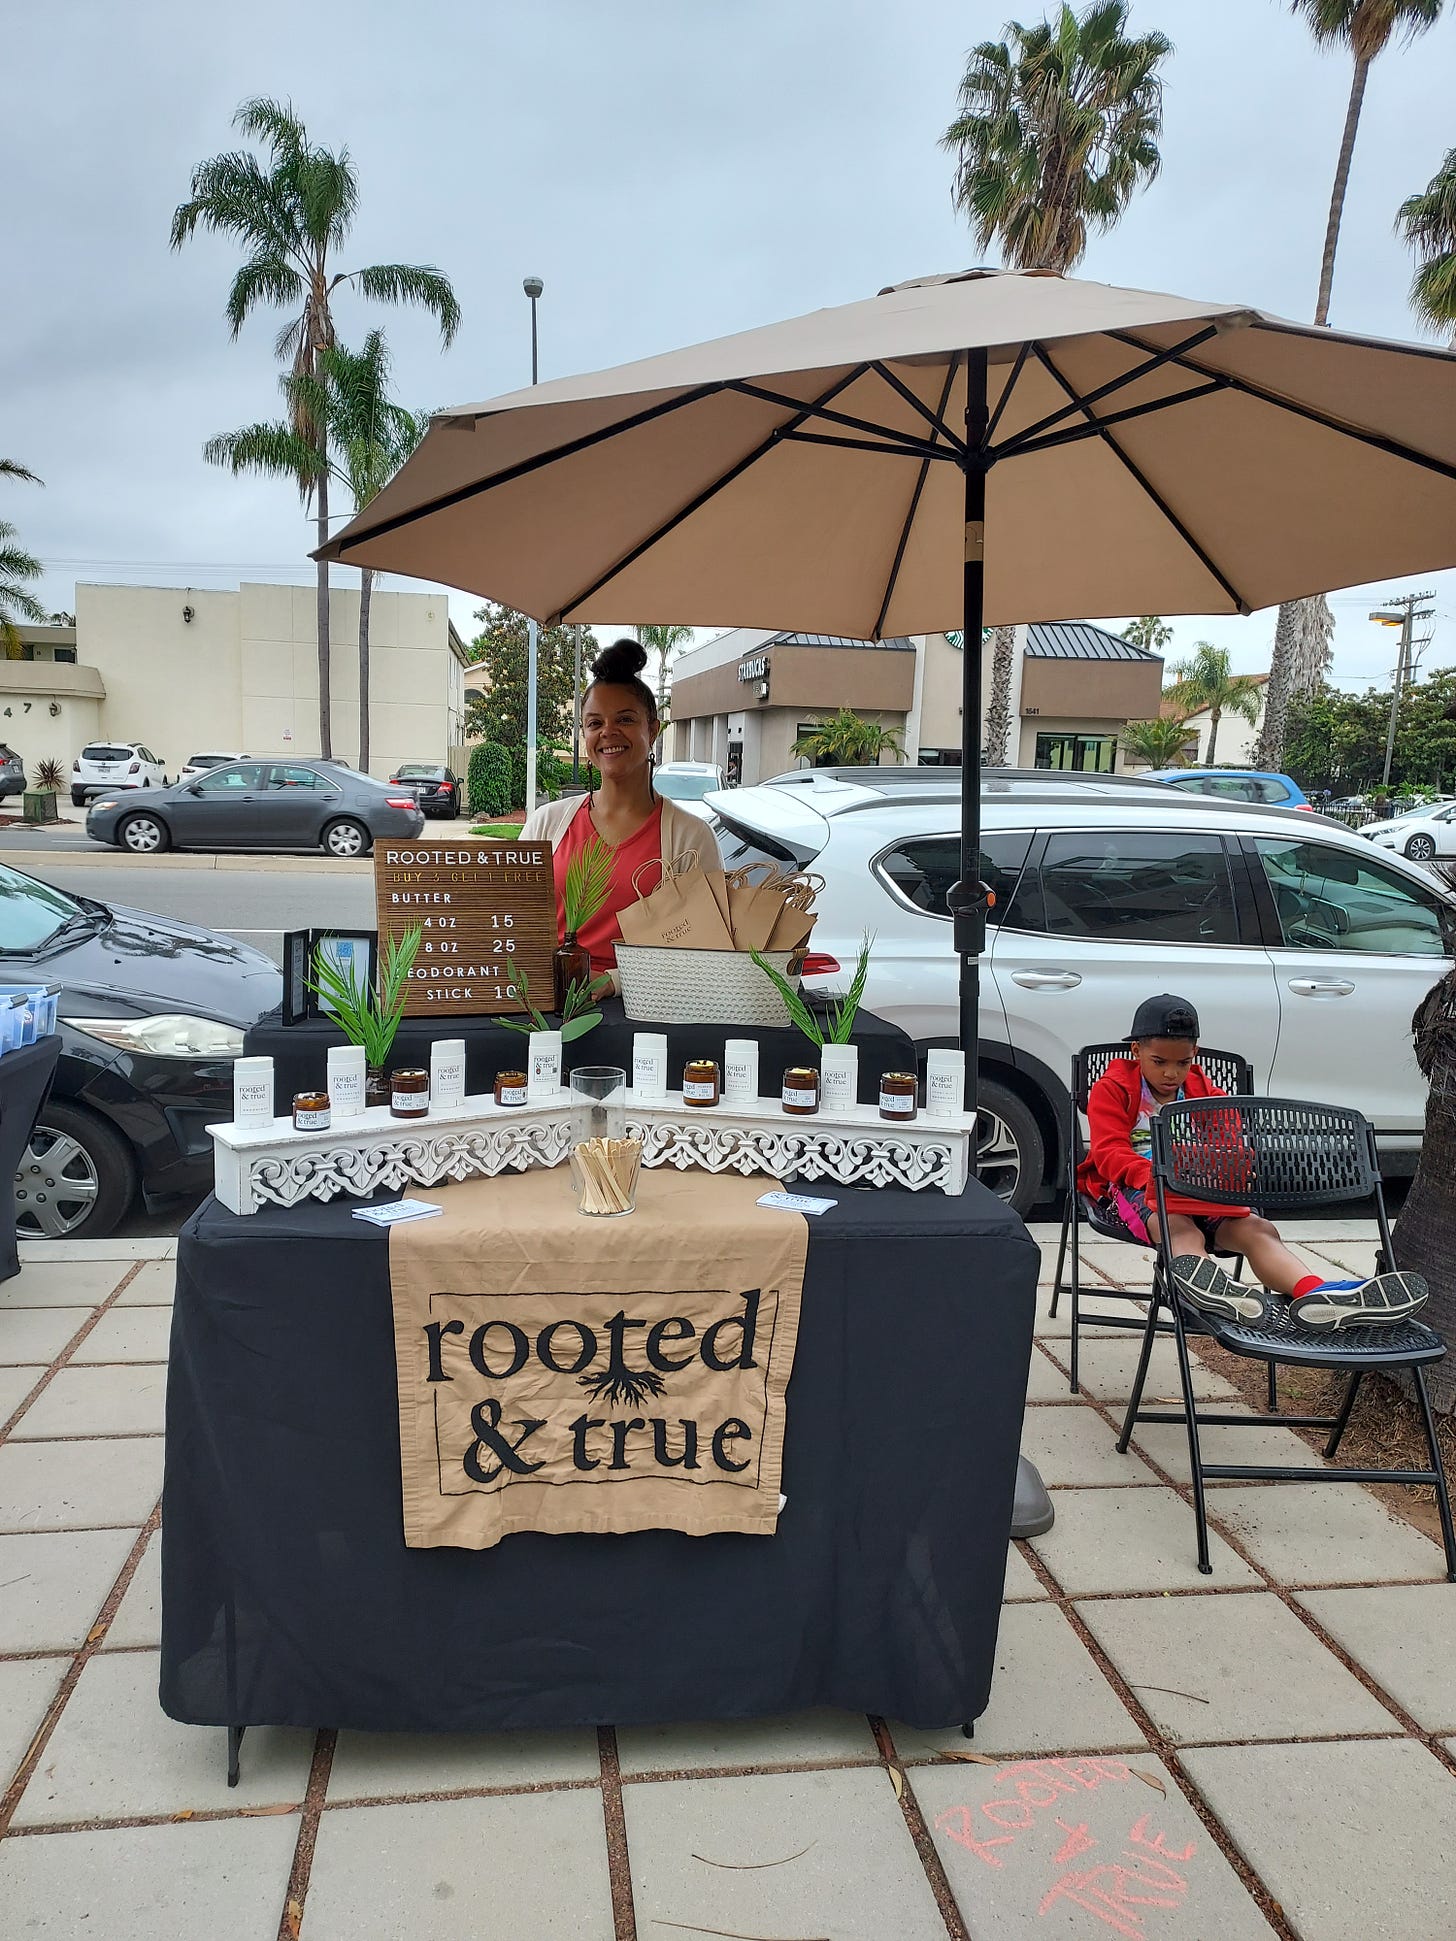 A woman poses behind a marketplace table set up with deoderant and body butter under a beige umbrella on the sidewalk. Palm trees dot the background.